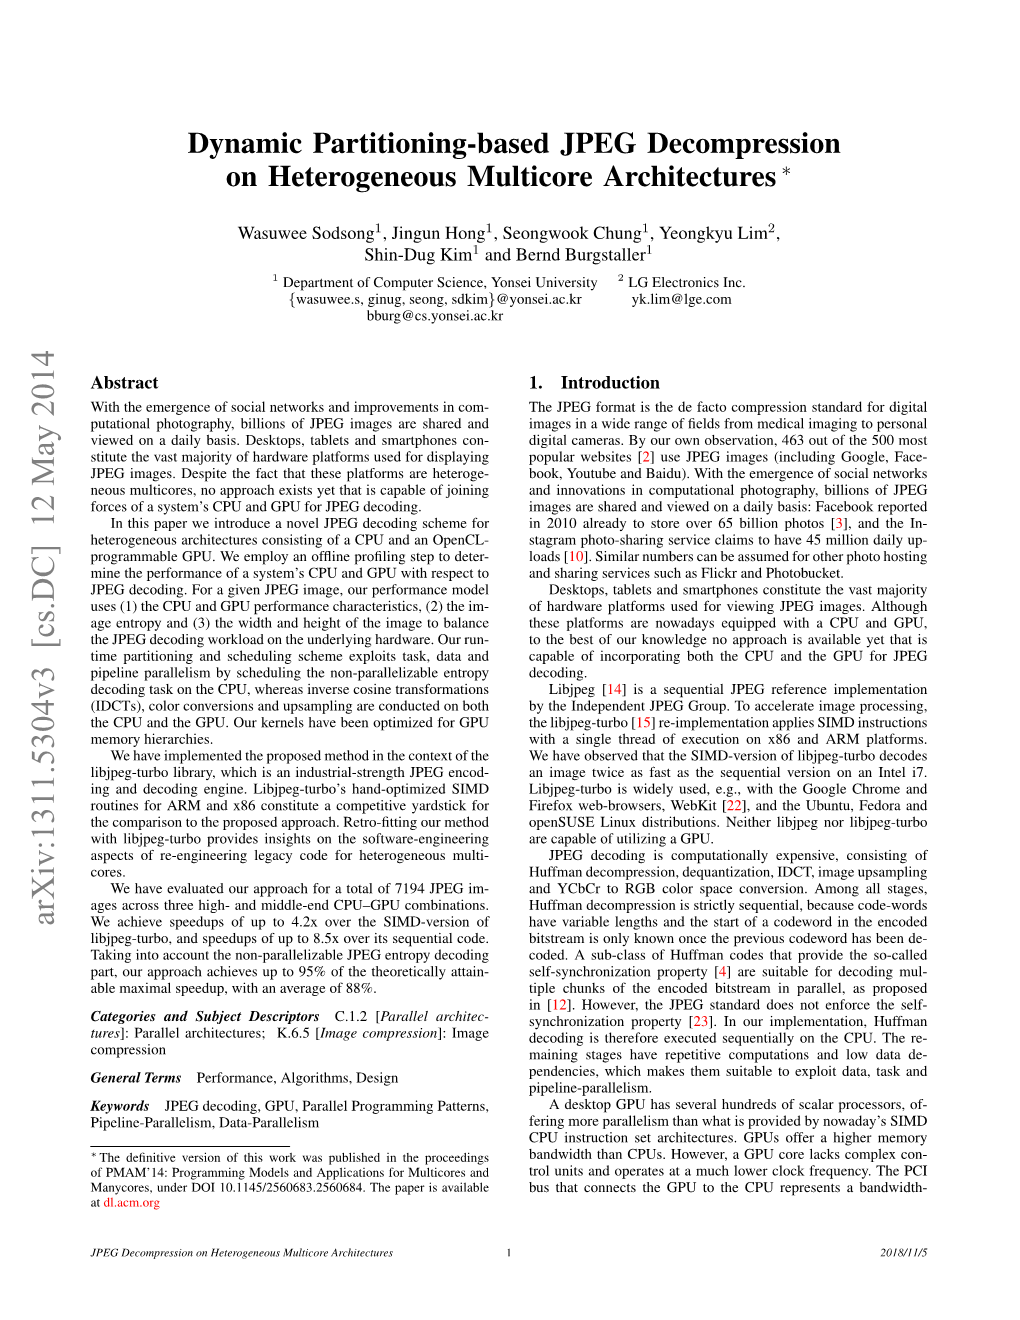 Dynamic Partitioning-Based JPEG Decompression on Heterogeneous Multicore Architectures ∗